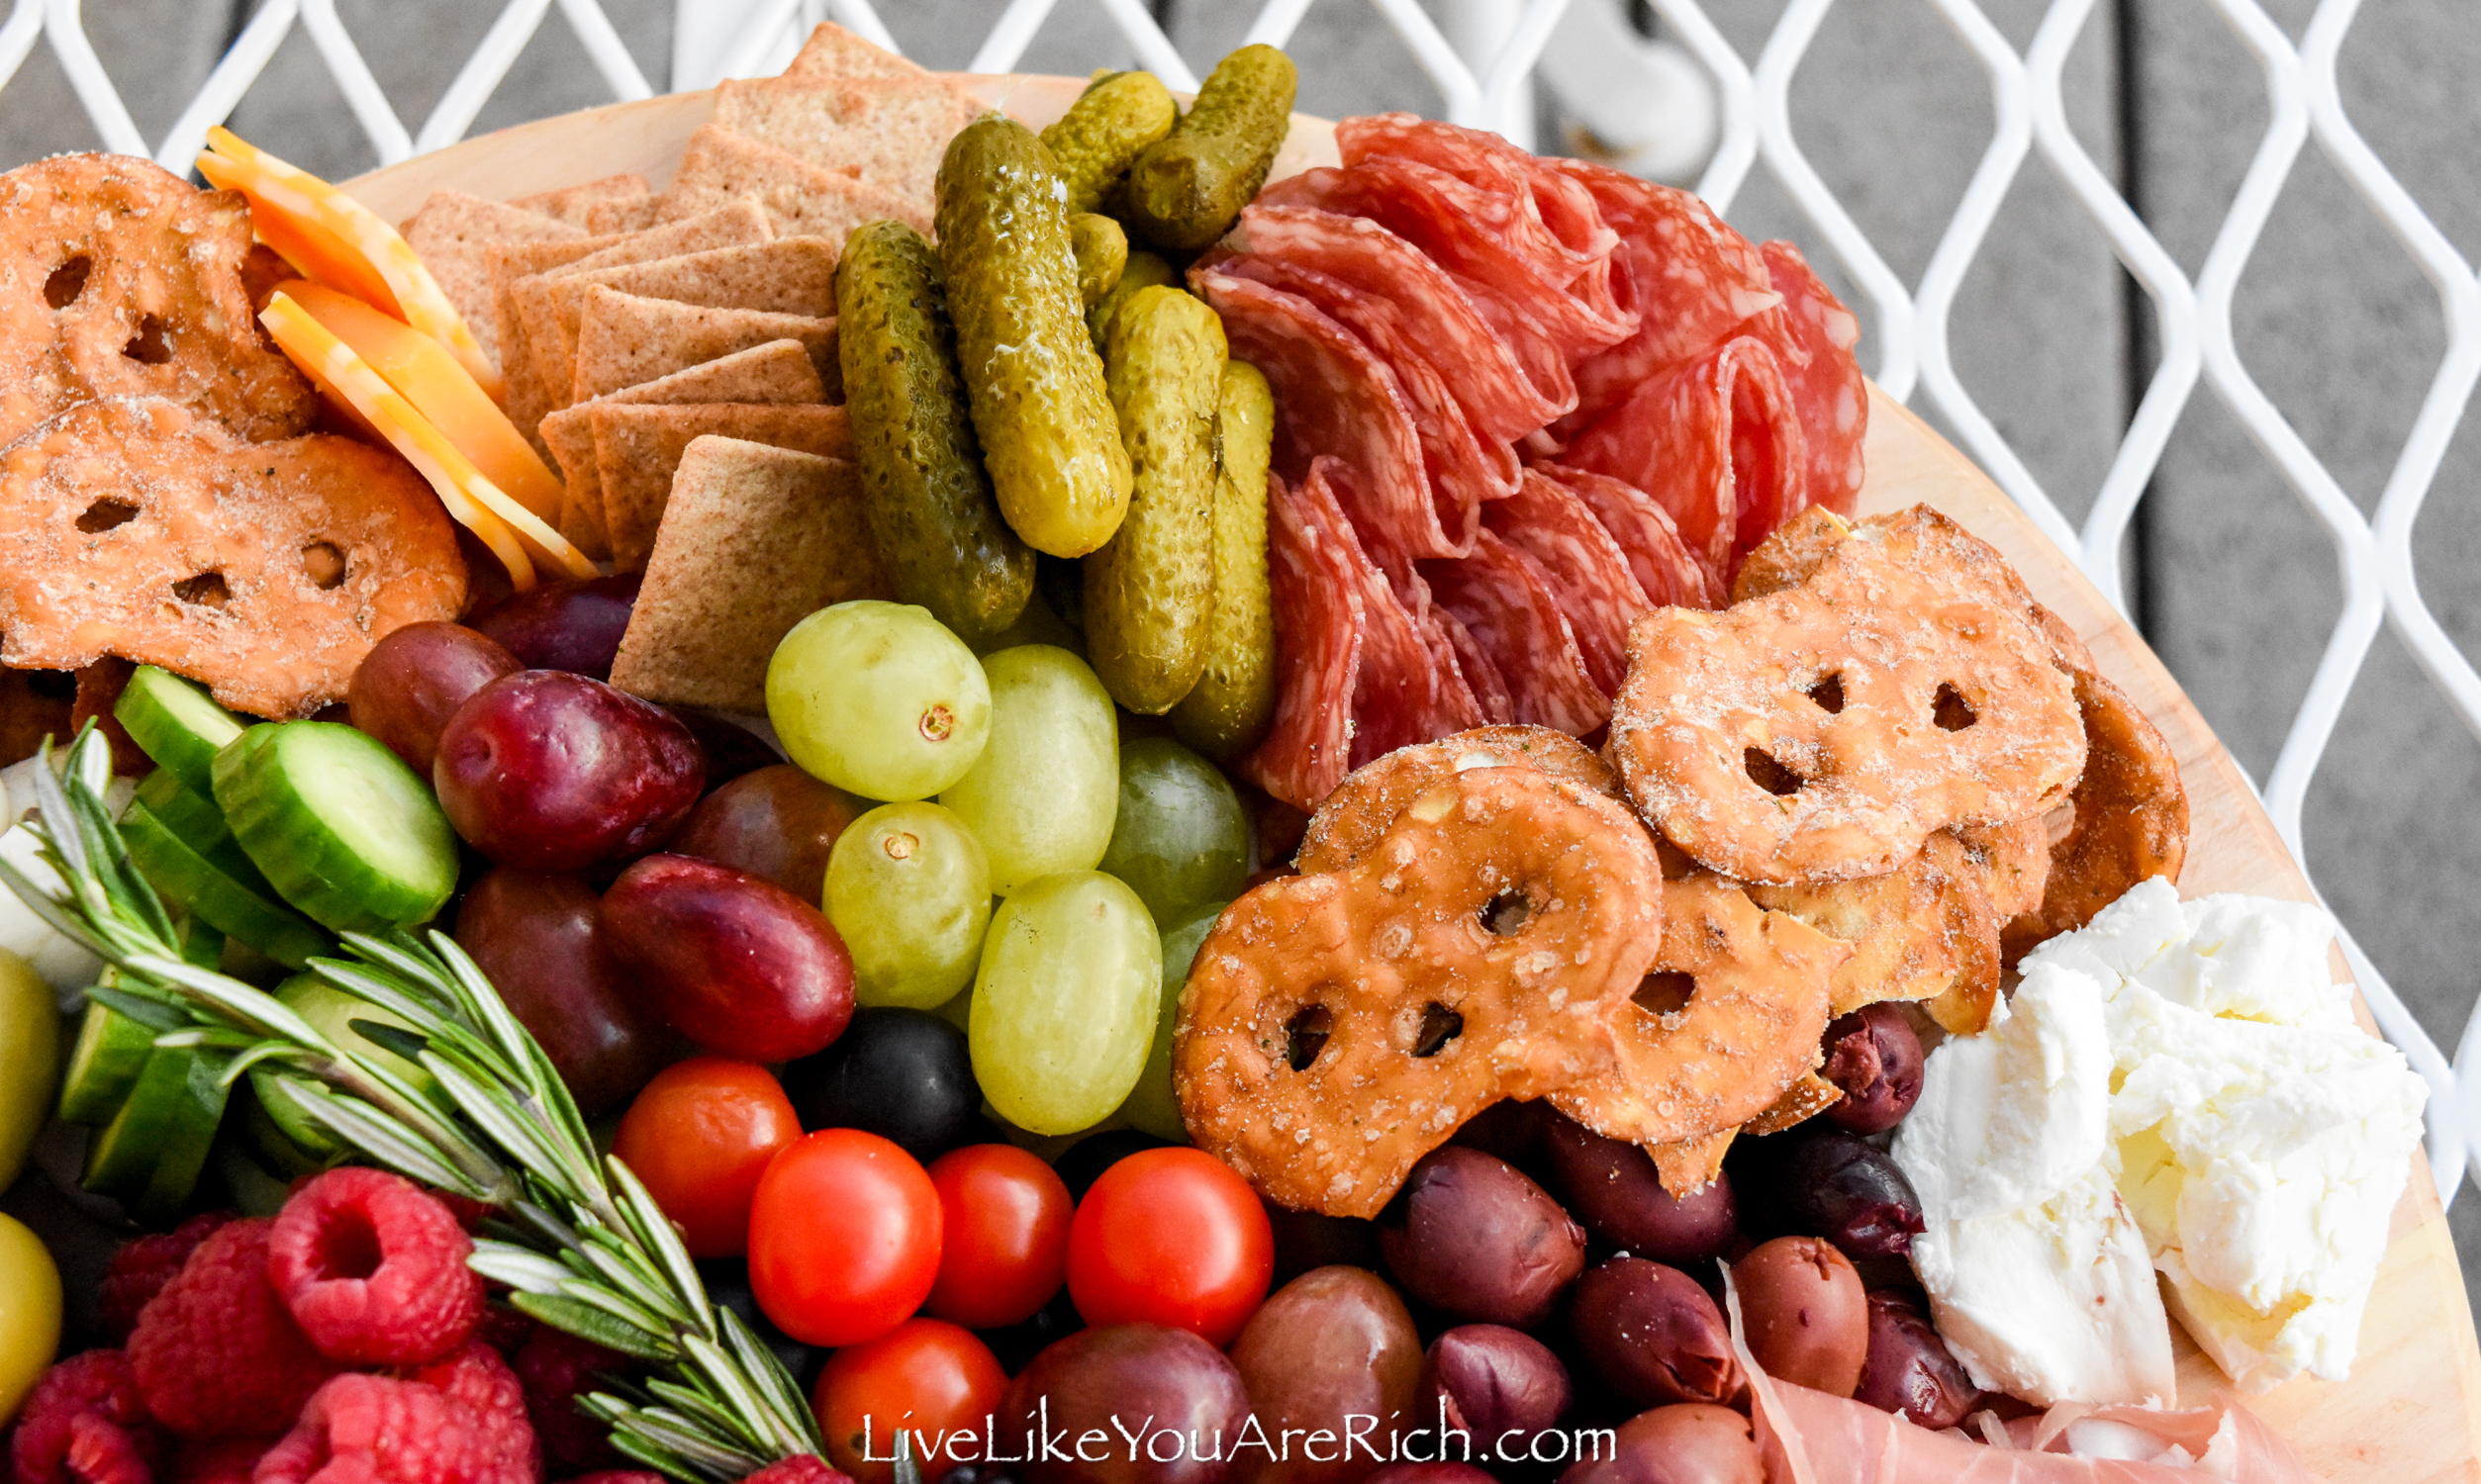 7 Tips to Making an Inexpensive Charcuterie Board